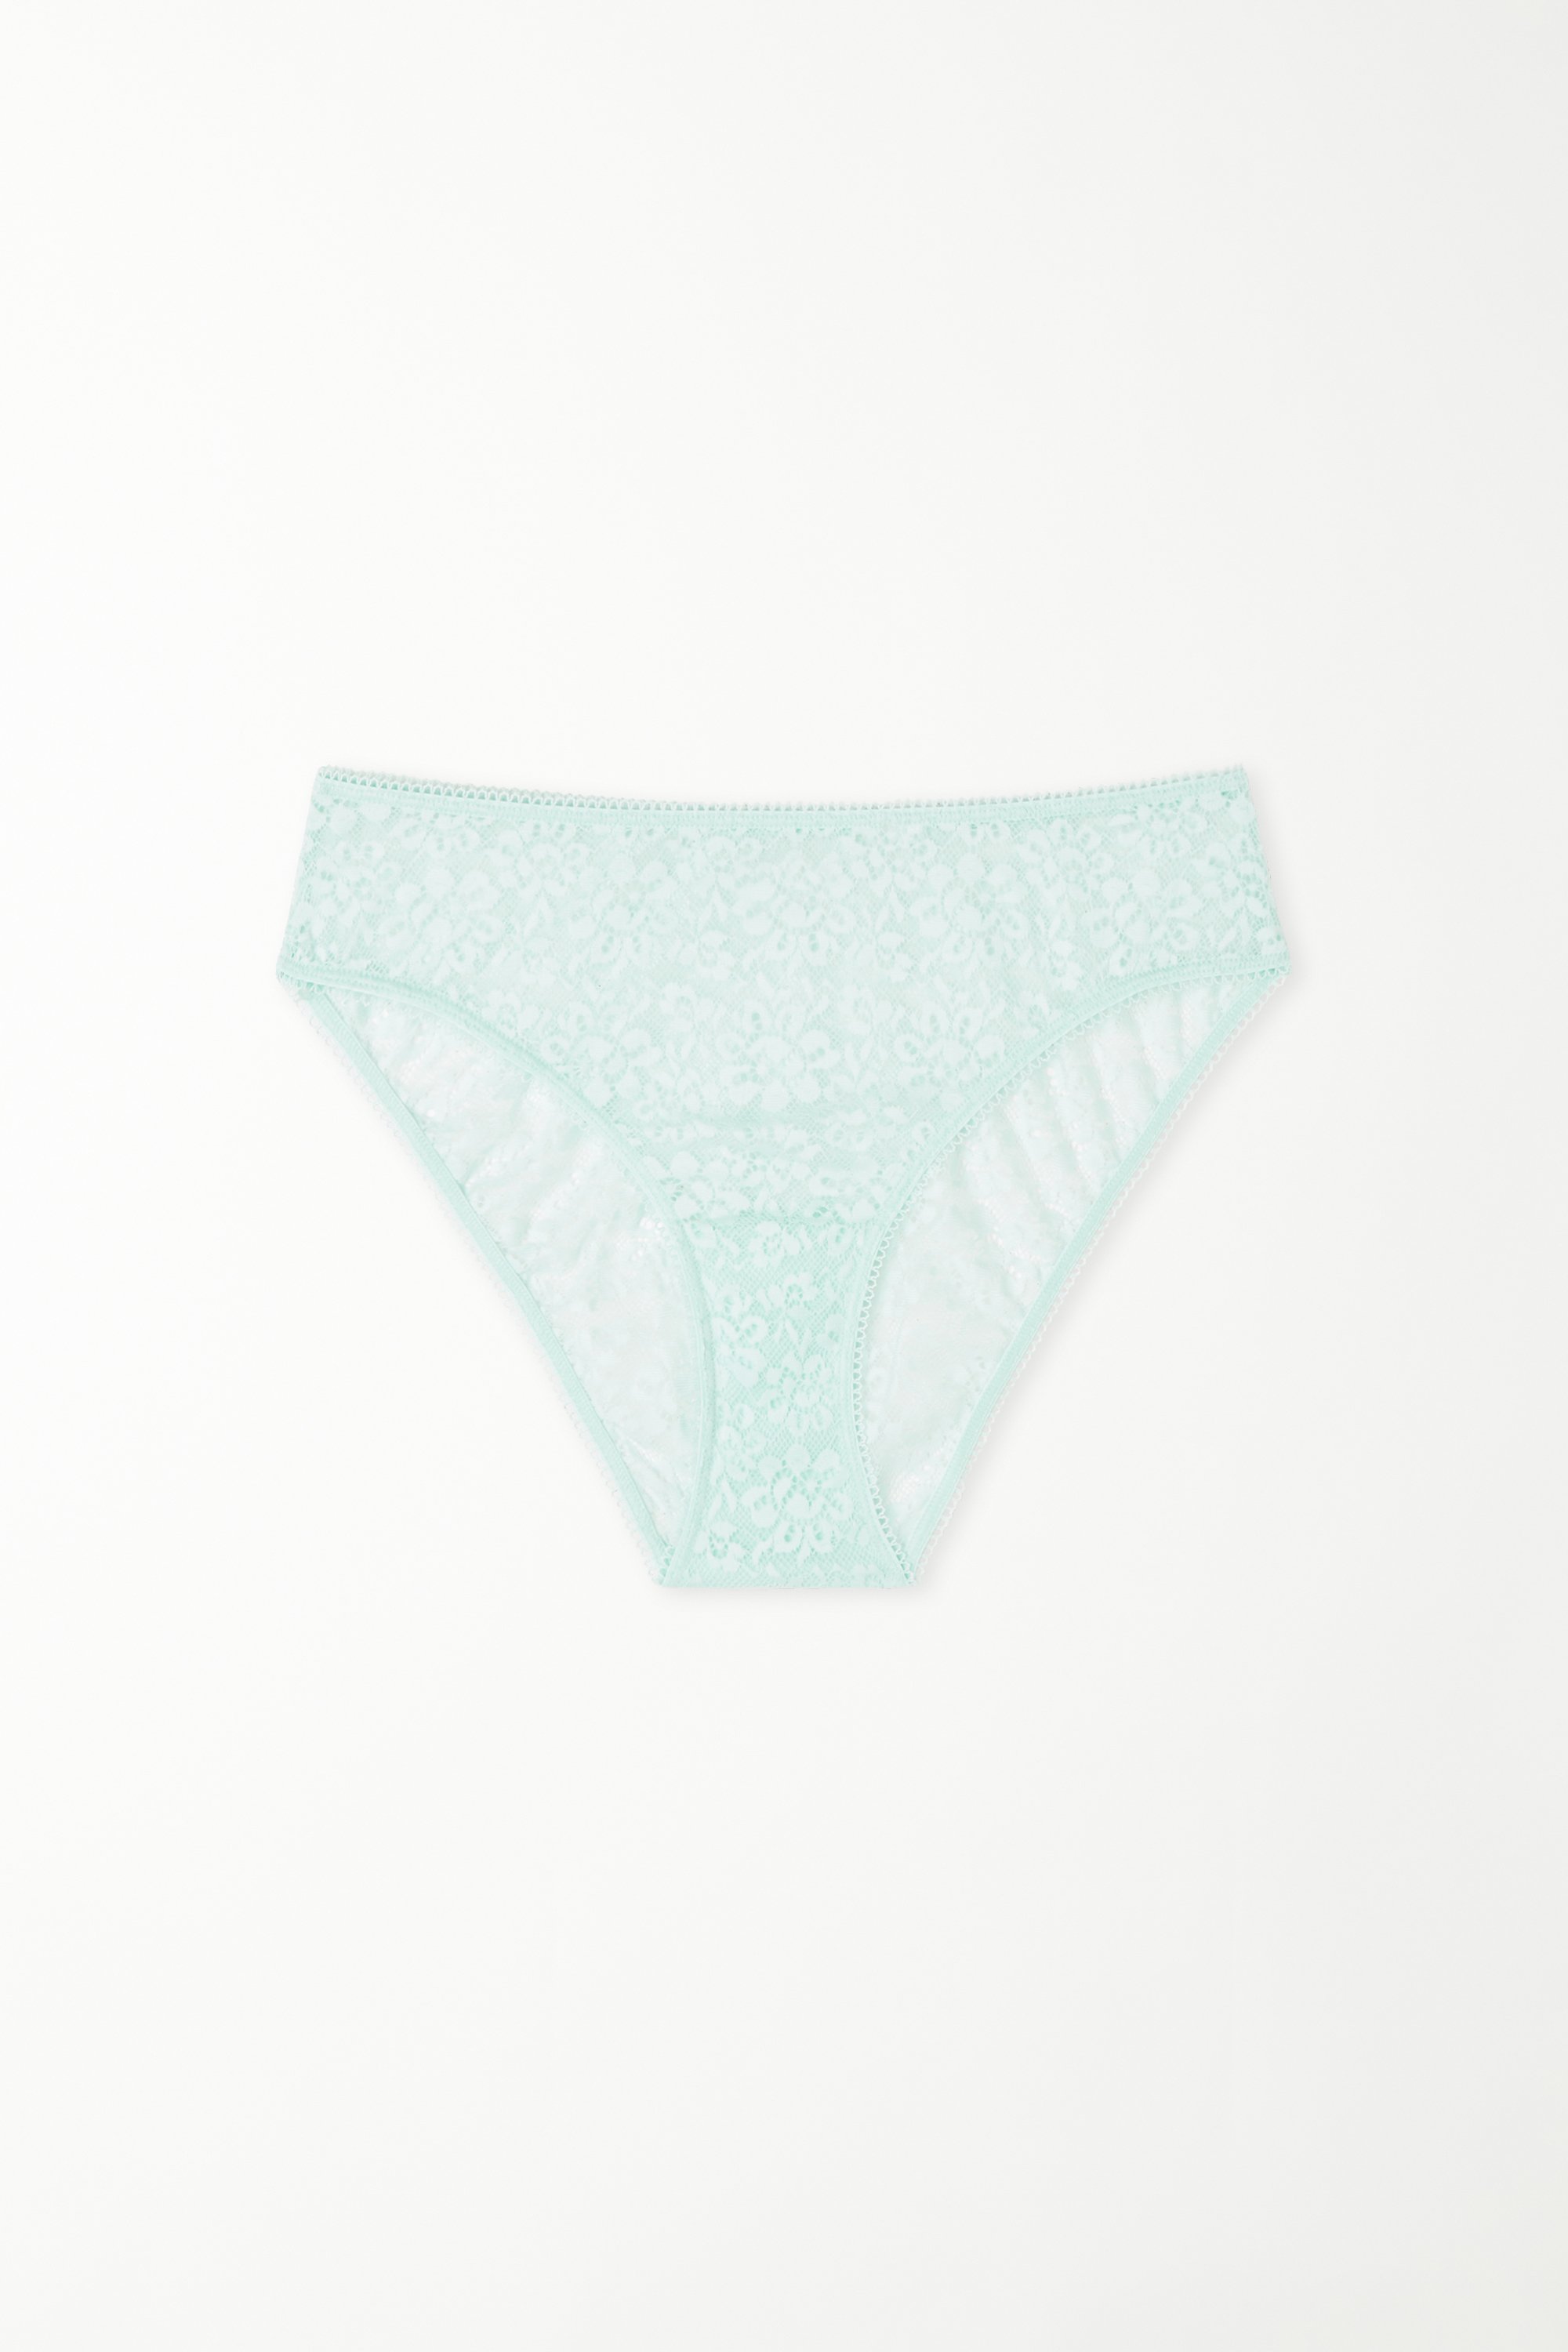 Recycled Lace High-Cut Panties